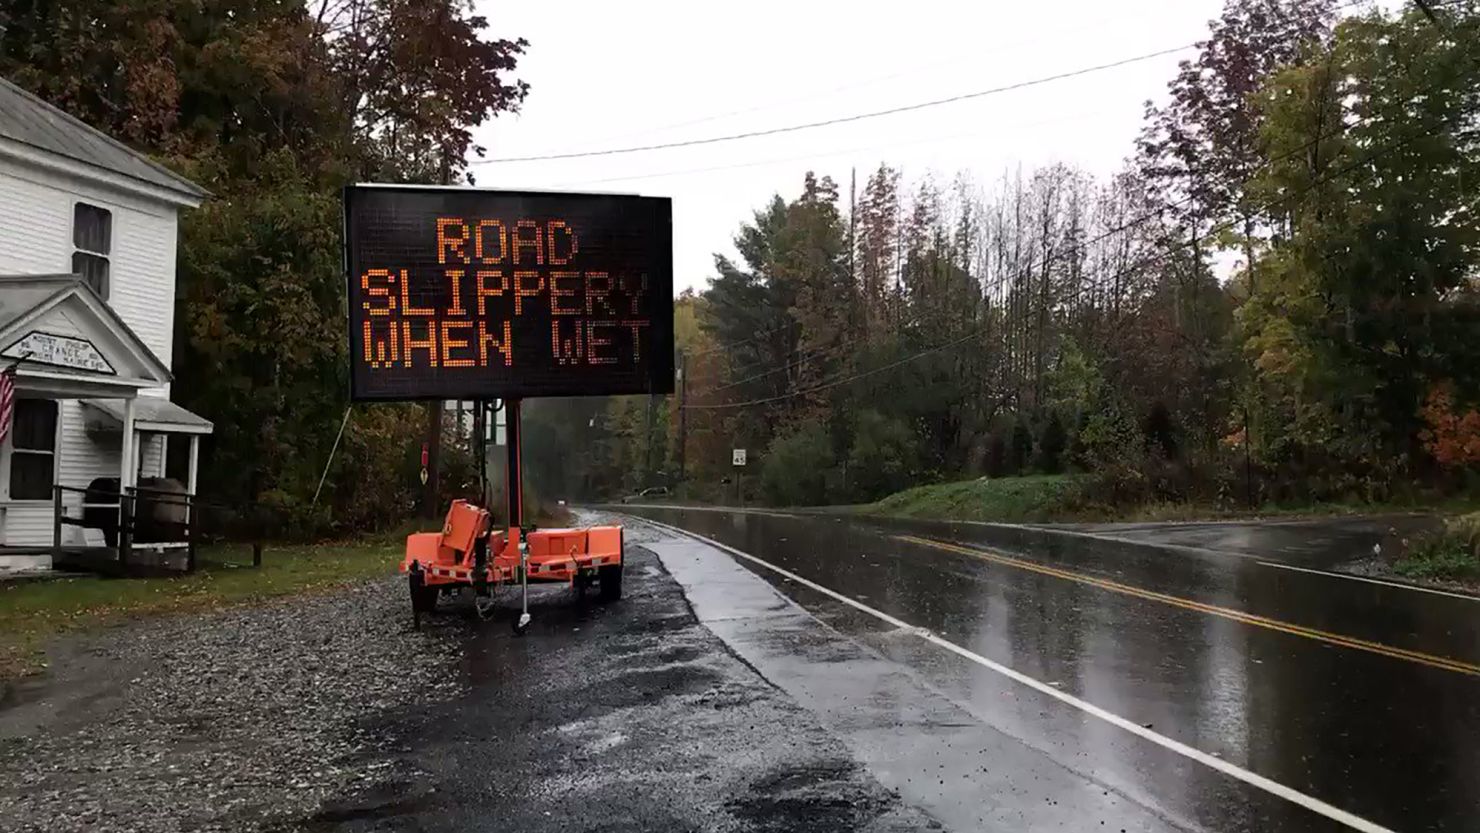 Residents described a section of road in Maine, seen here after rain, as unusually slippery after a pavement sealant was applied. 